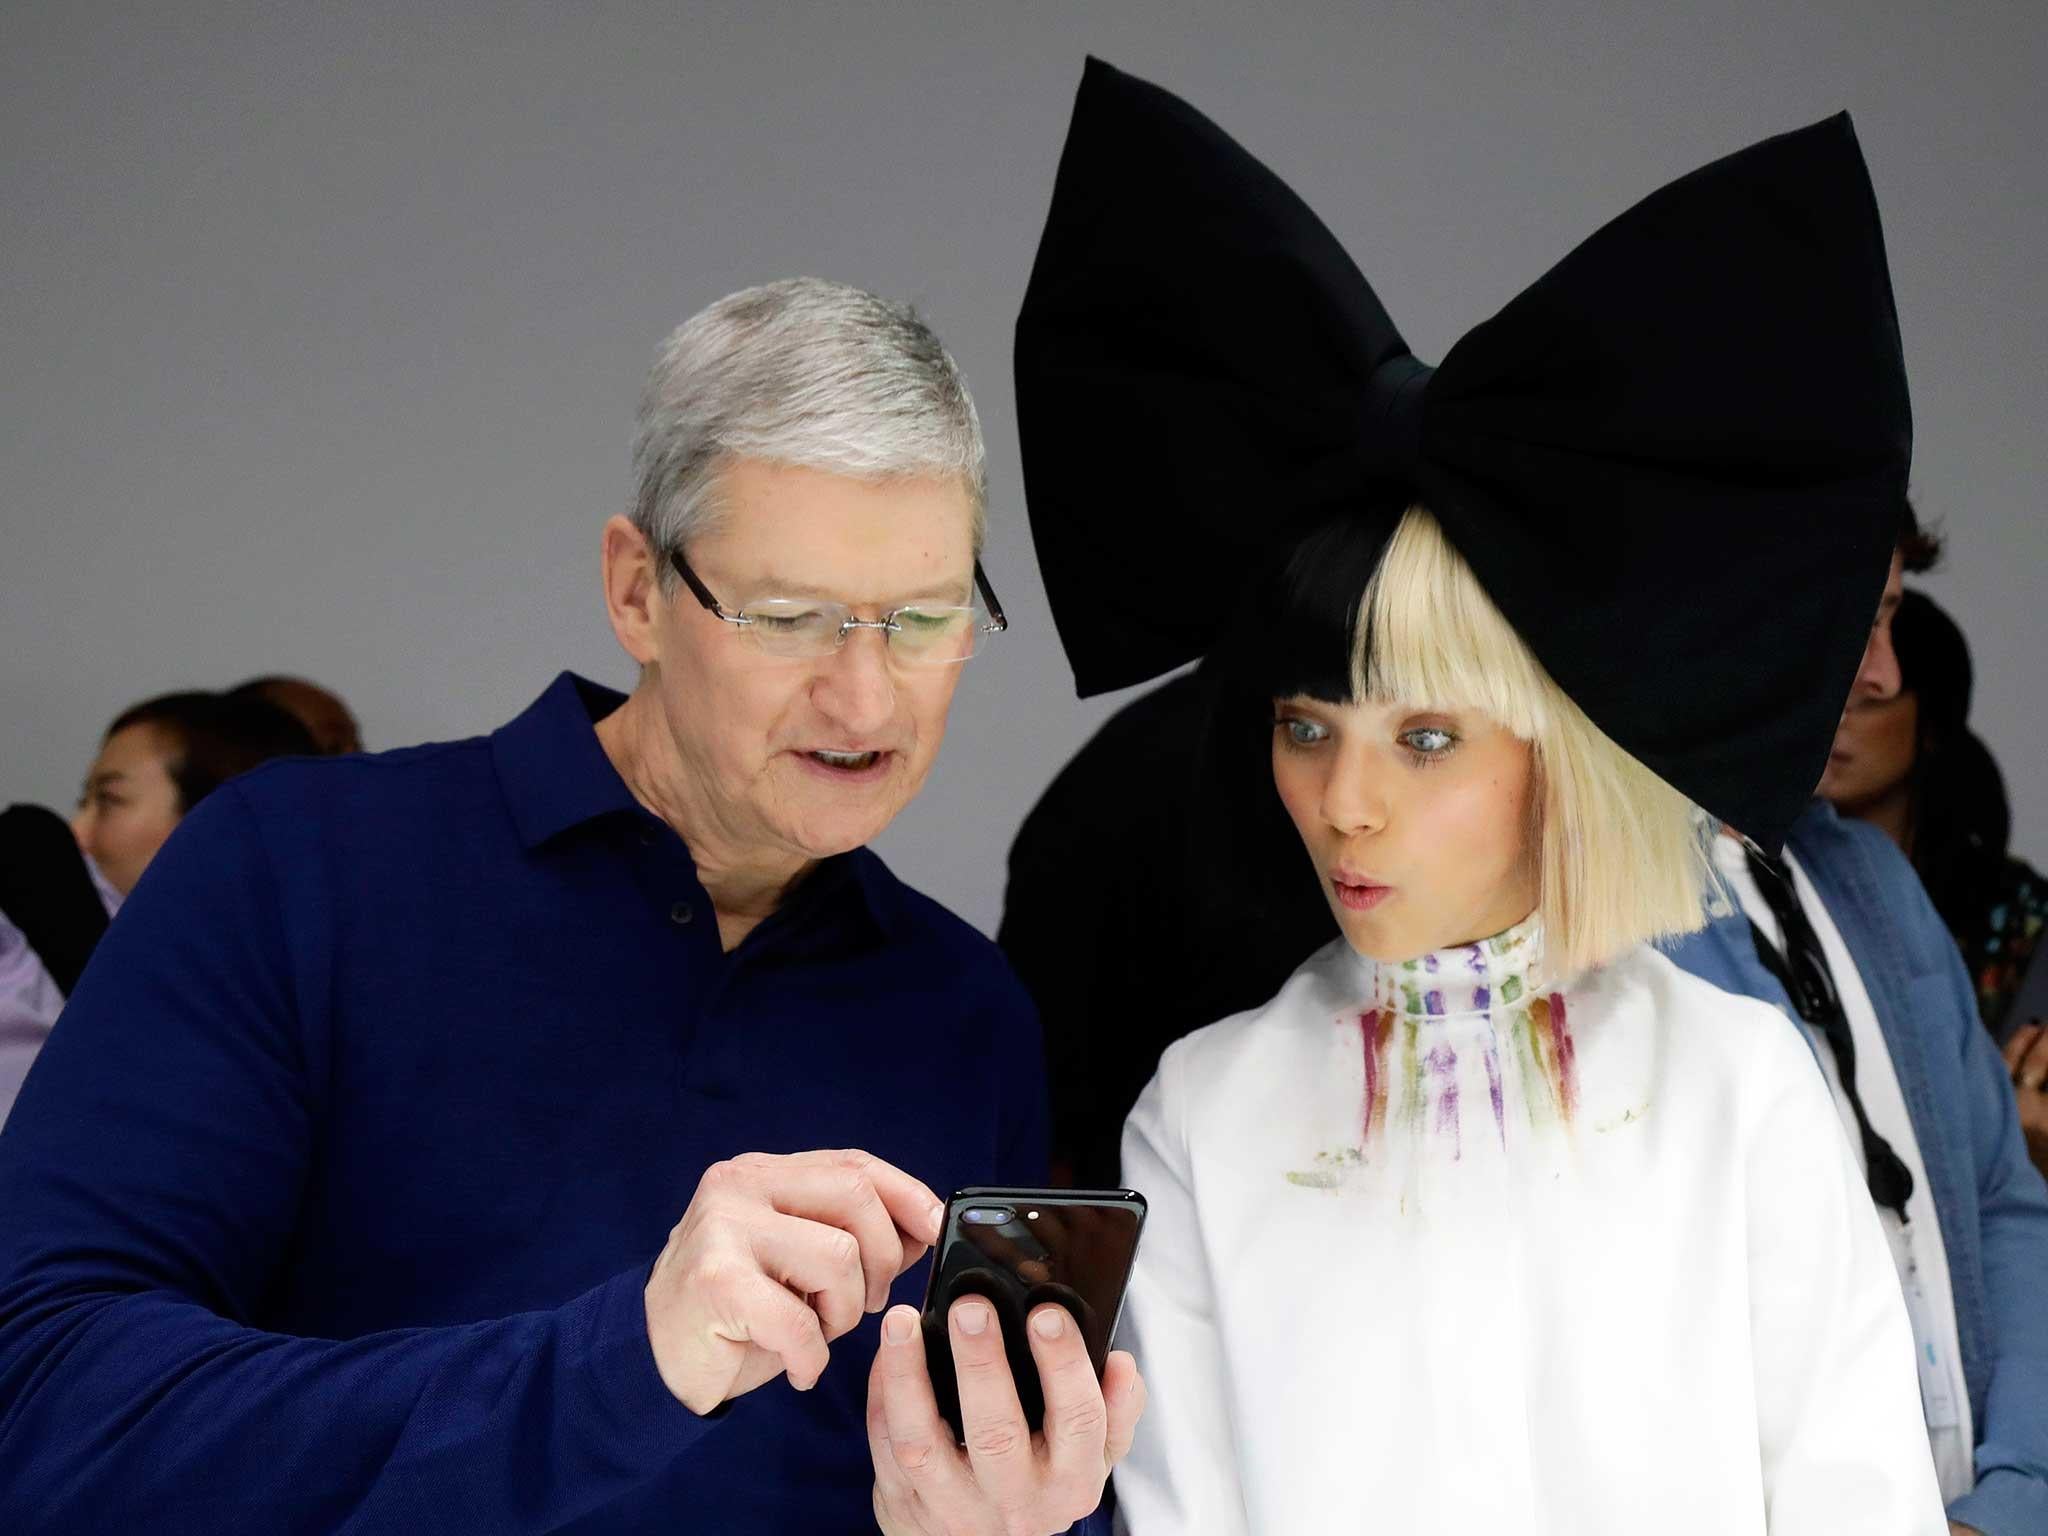 Apple CEO Tim Cook demonstrates an iPhone 7 at the product launch earlier this month